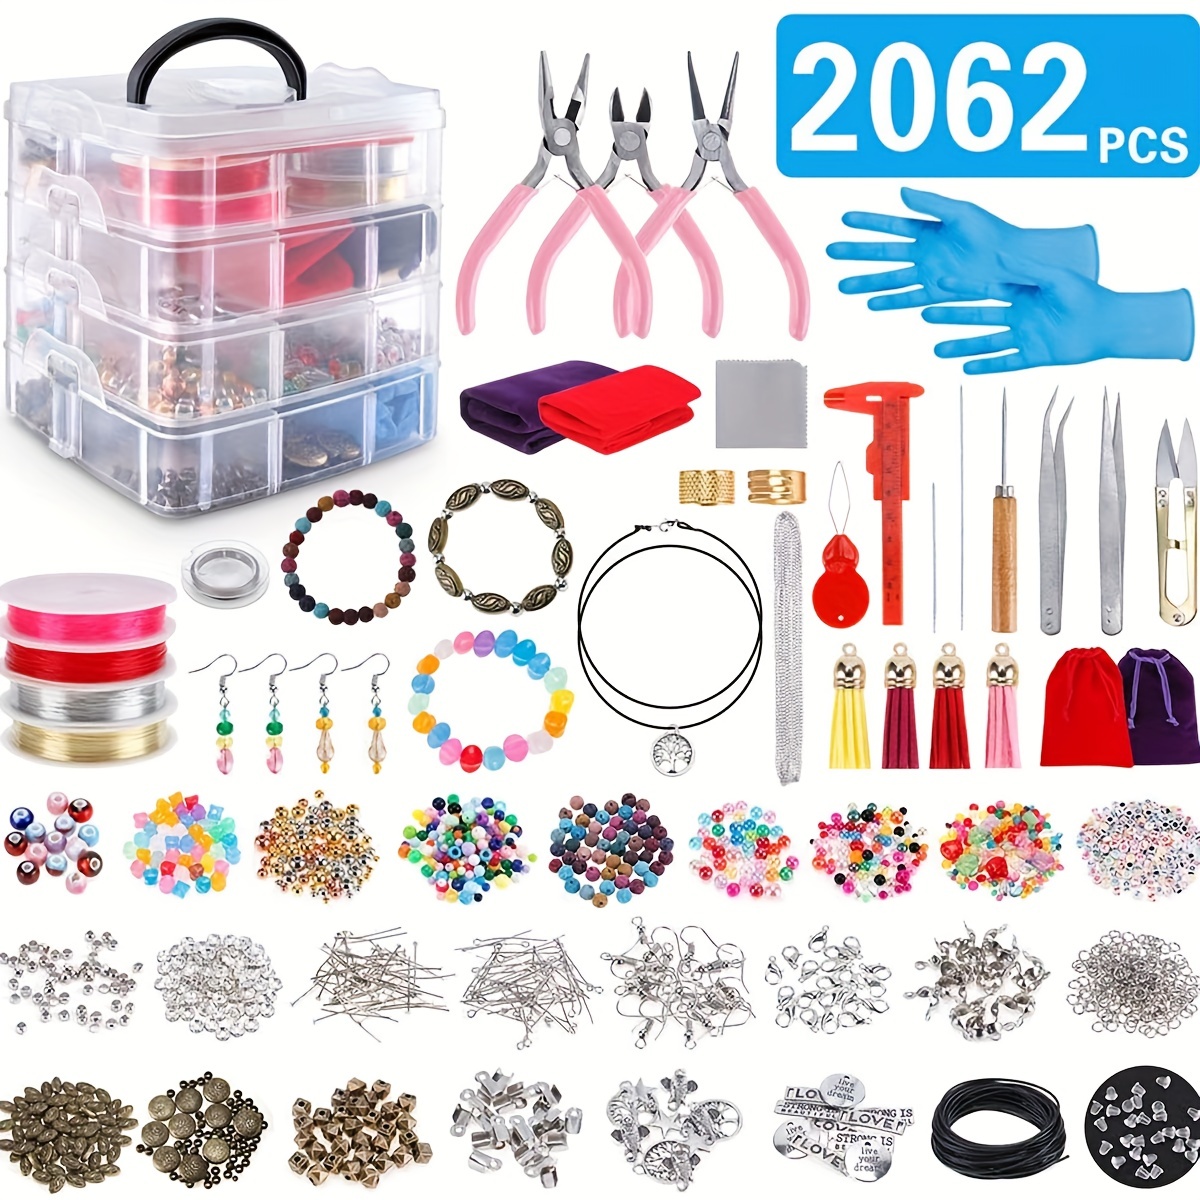 

2062pcs New Jewelry Making Supplies Kit Diy Jewelry Accessories Letter Beading Set Material For Diy Jewelry Making Beads Set Toy Perfect Gift Box For Diy Lovers Adults Teens Daily Use